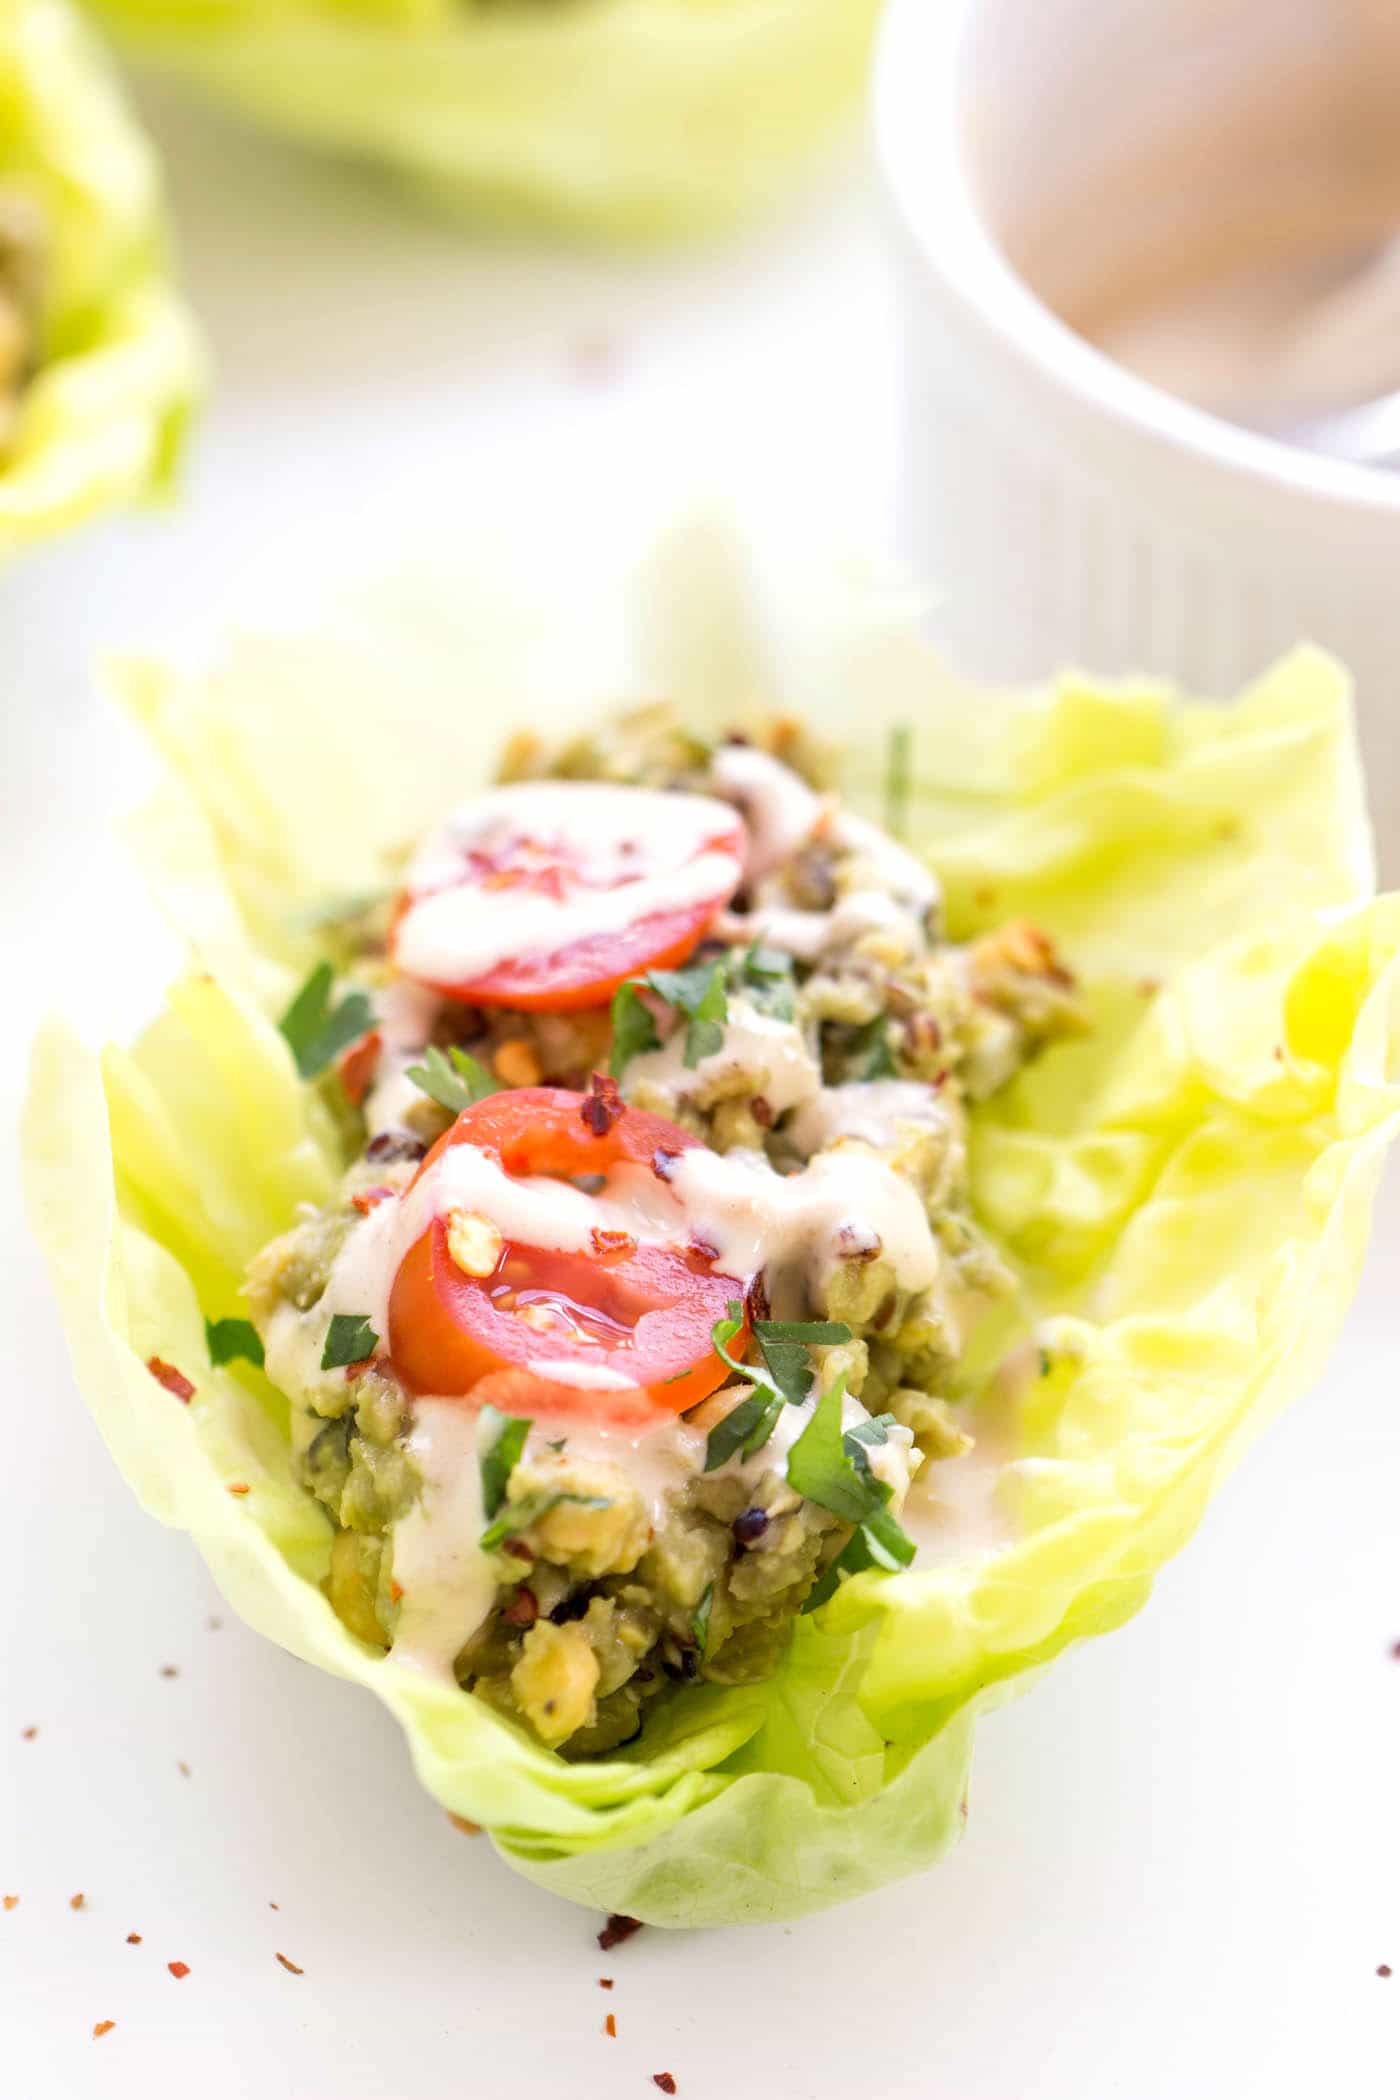 QUINOA LETTUCE WRAPS with a smashed chickpea + avocado salad, topped with sliced cherry tomatoes and drizzled with tahini. Plant-based, high-protein and surprisingly filling! [gluten-free + vegan]